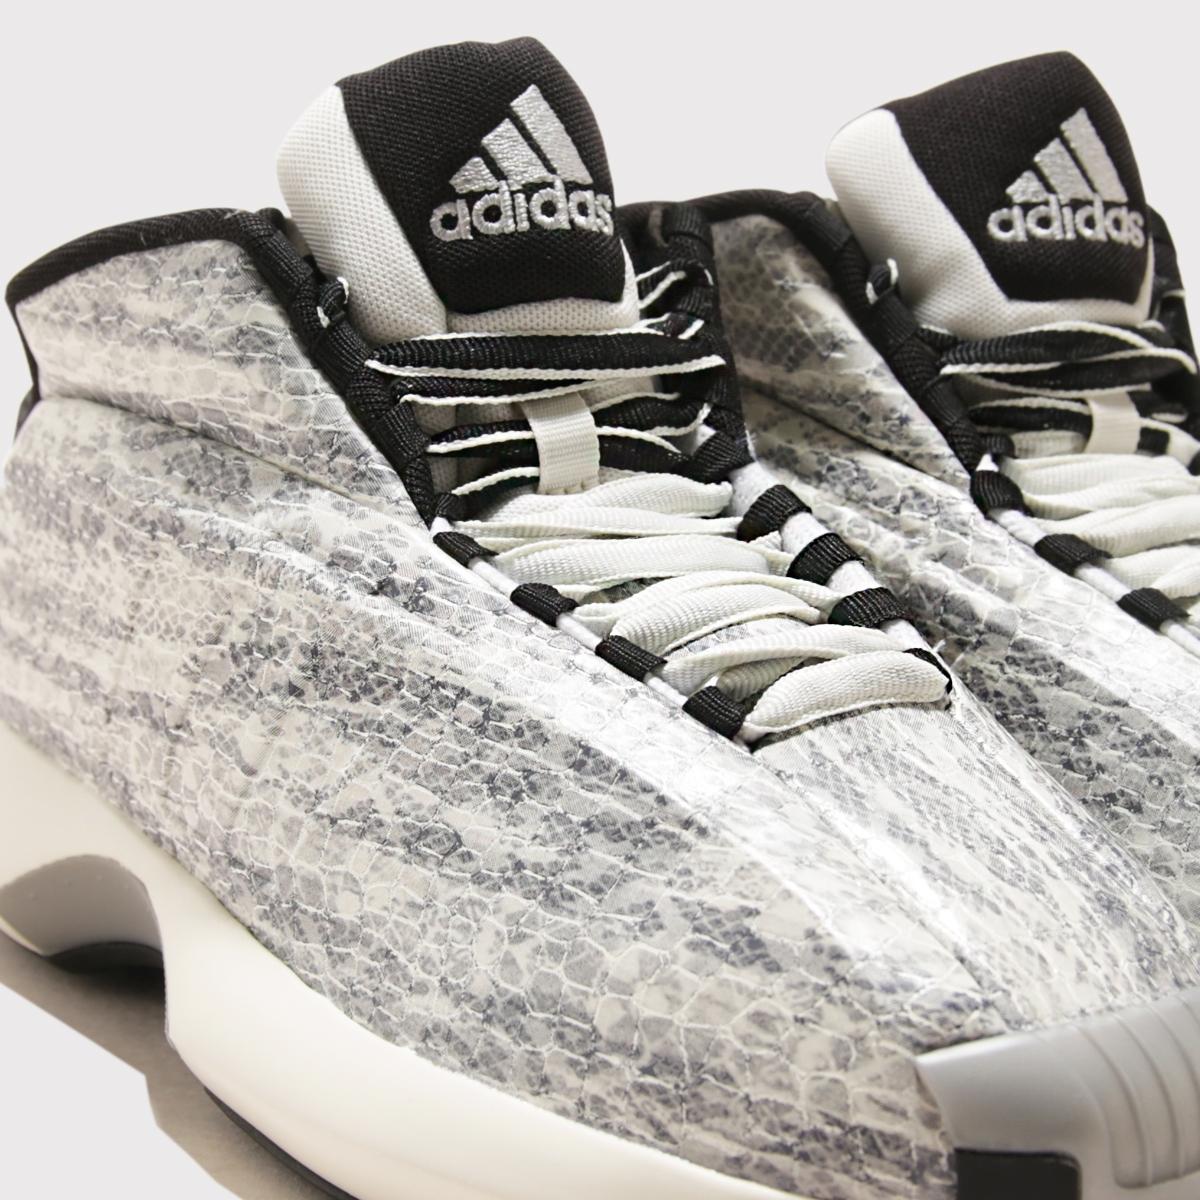 adidas Crazy 1 Snakeskin GY2405 Release Date